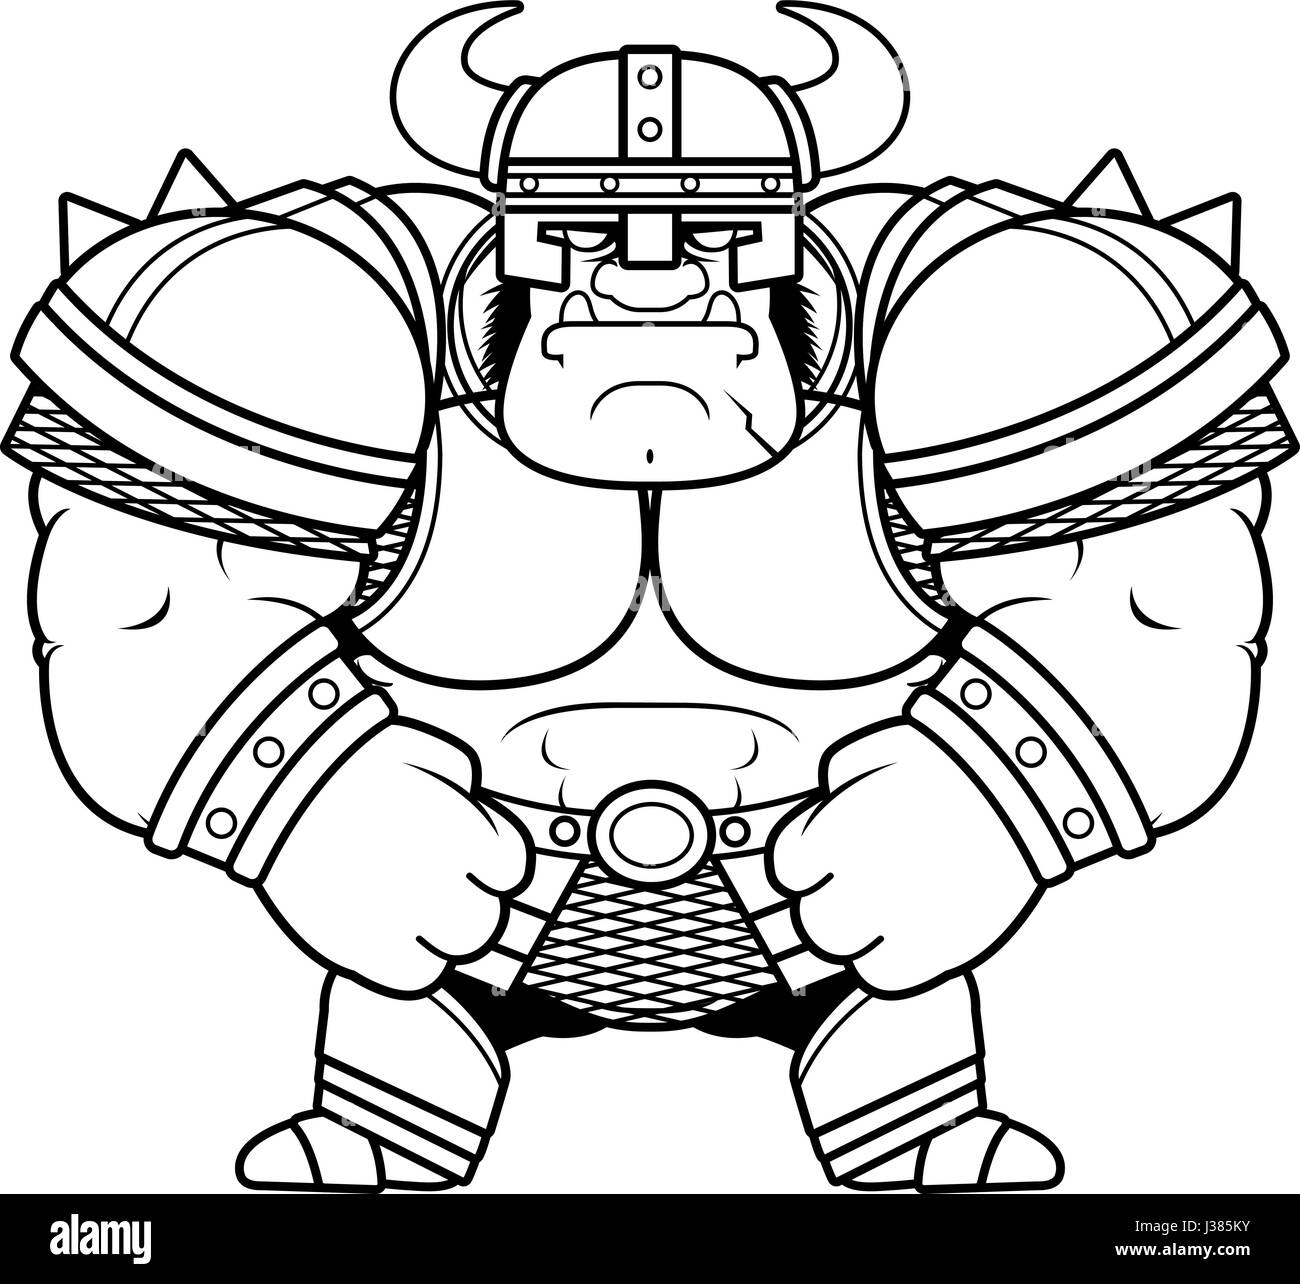 A cartoon illustration of a muscular orc in armor. Stock Vector